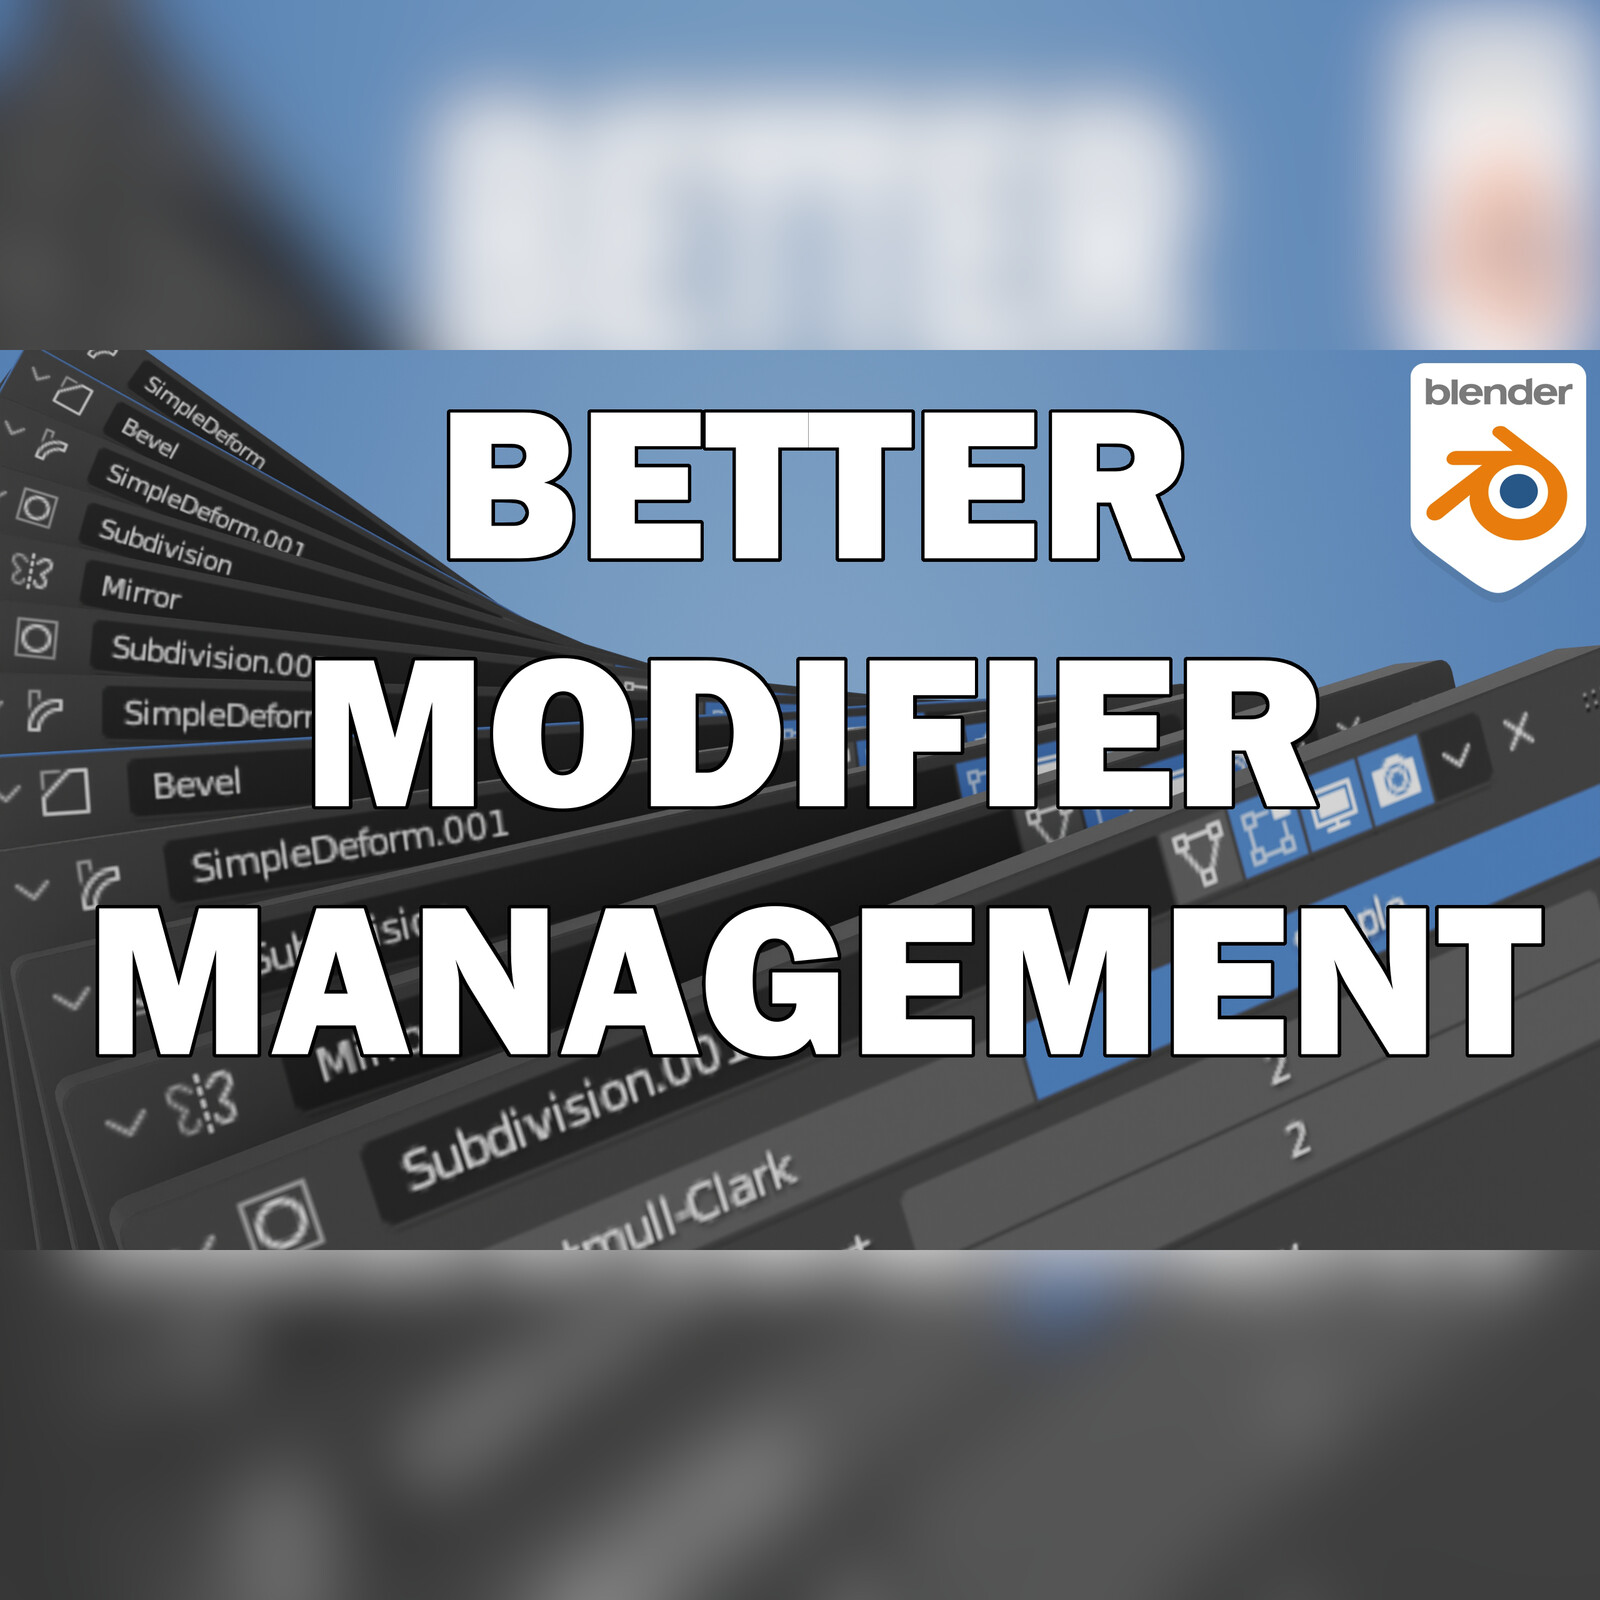 Modifier Tools: A must have add-on for Blender